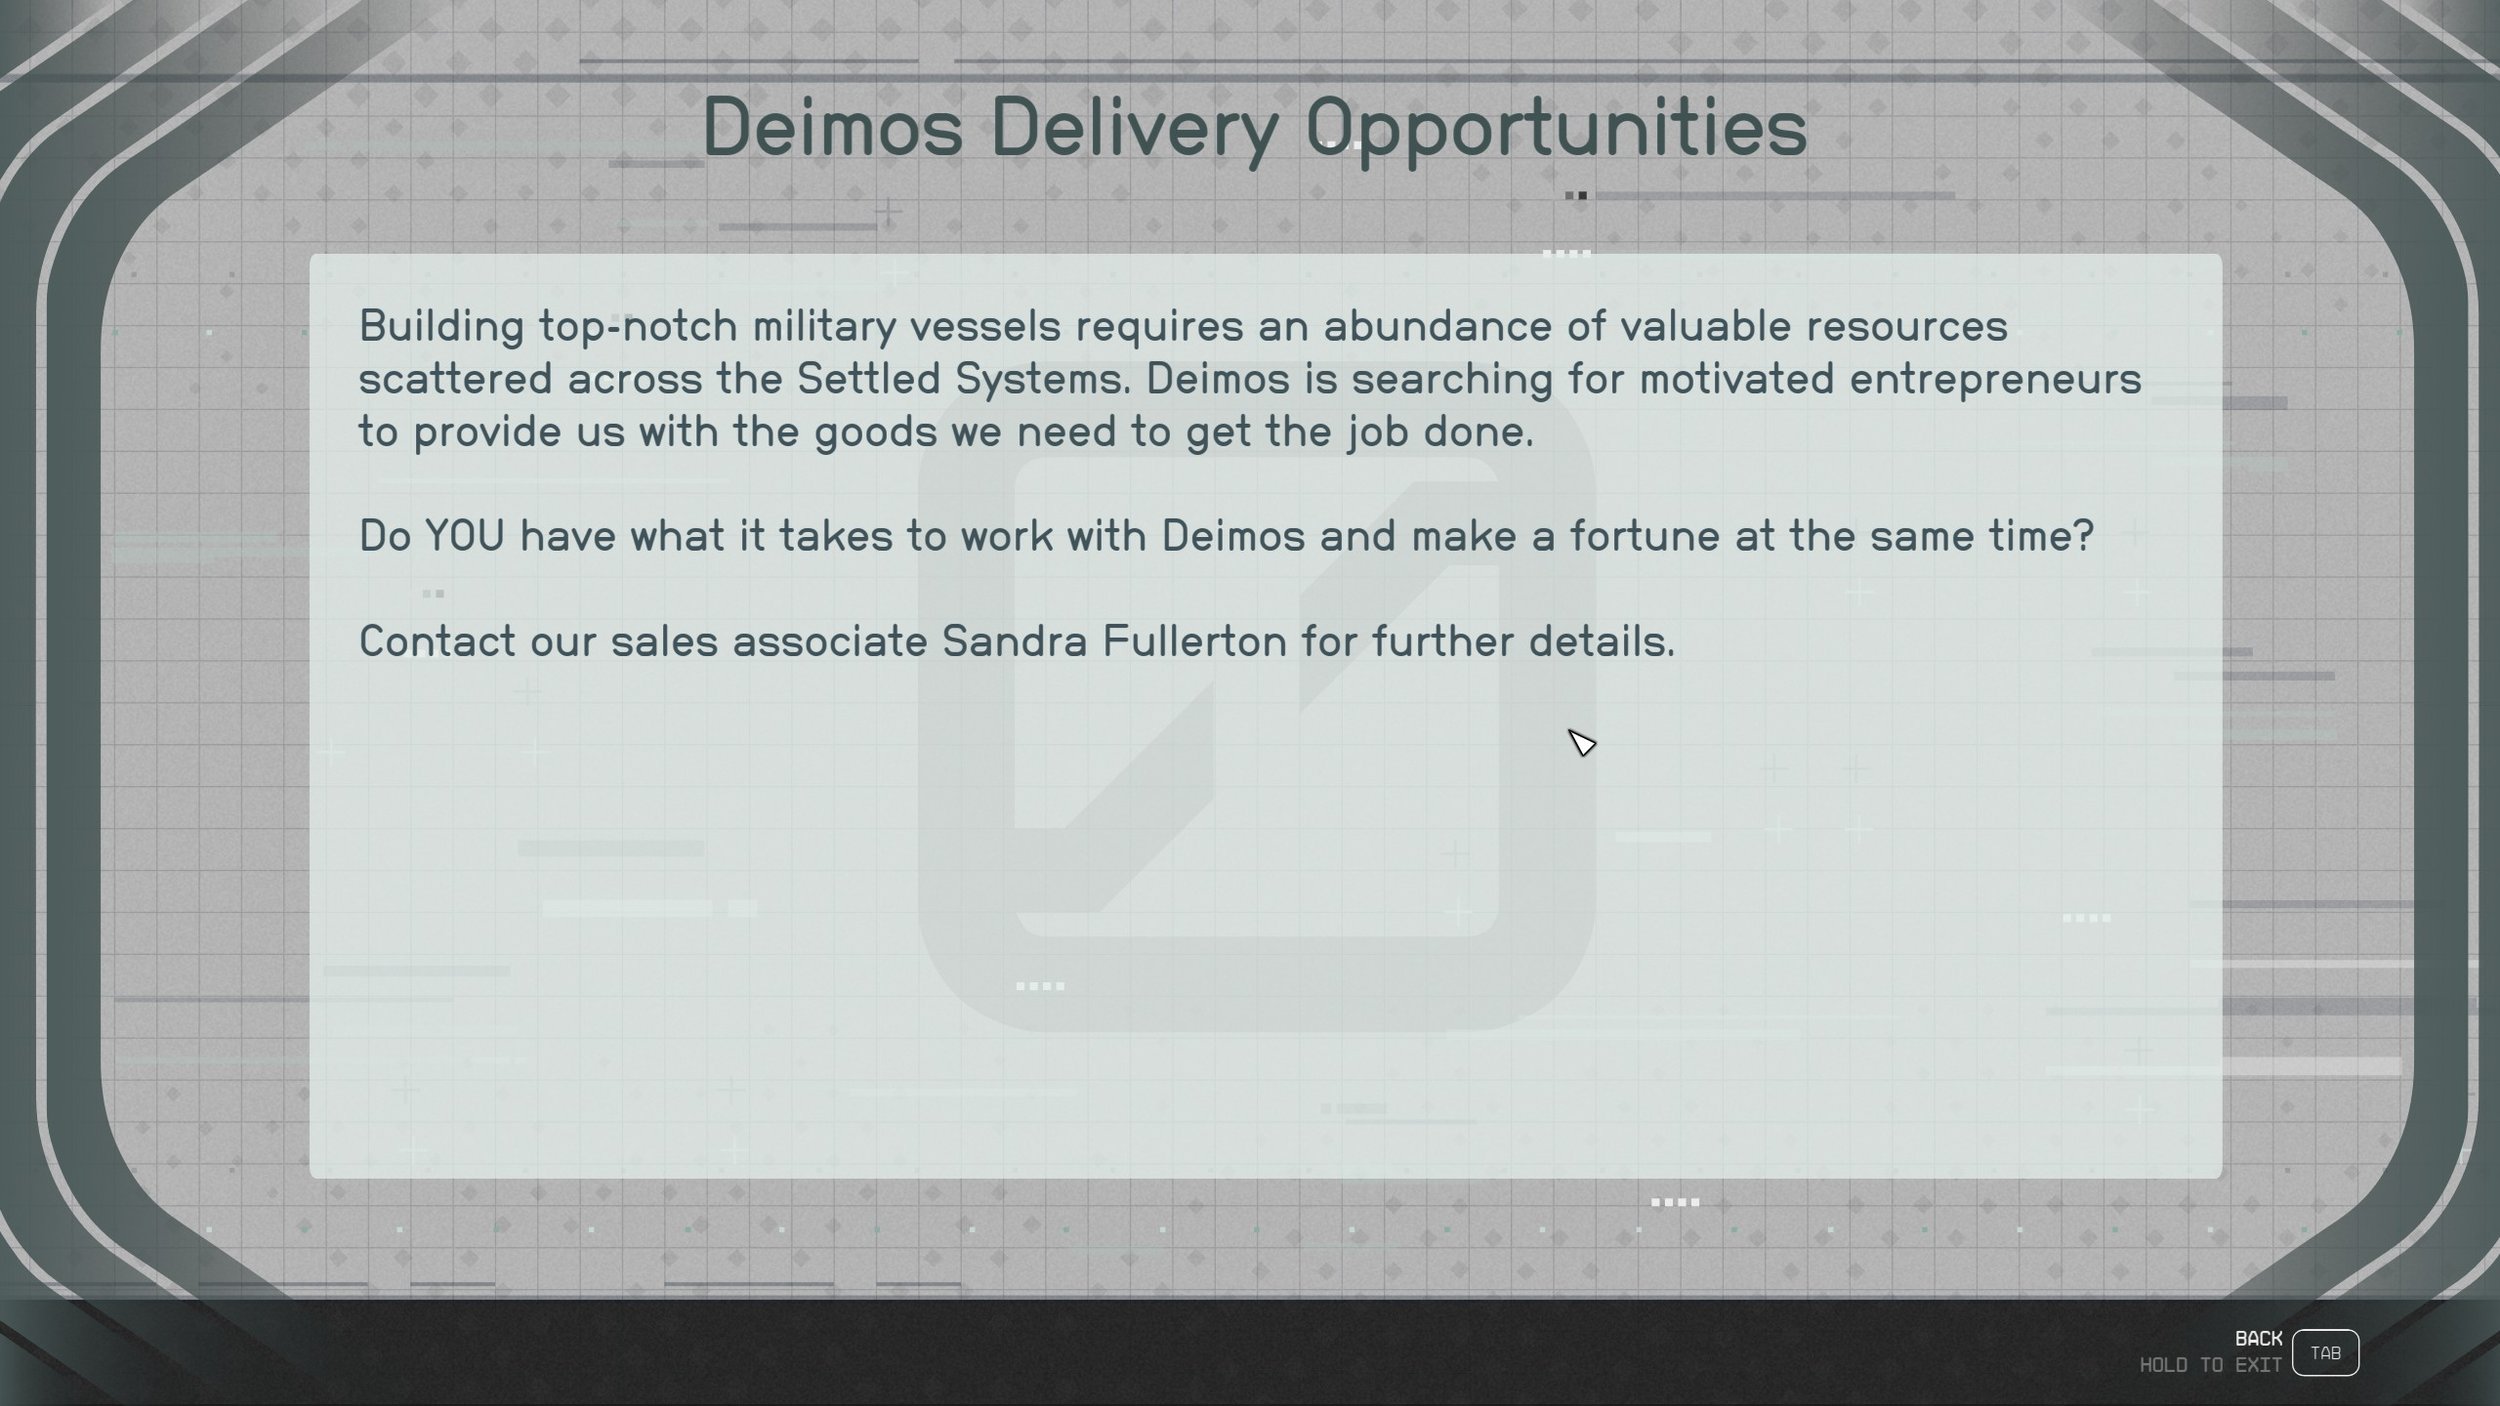 Deimos Delivery Opportunities